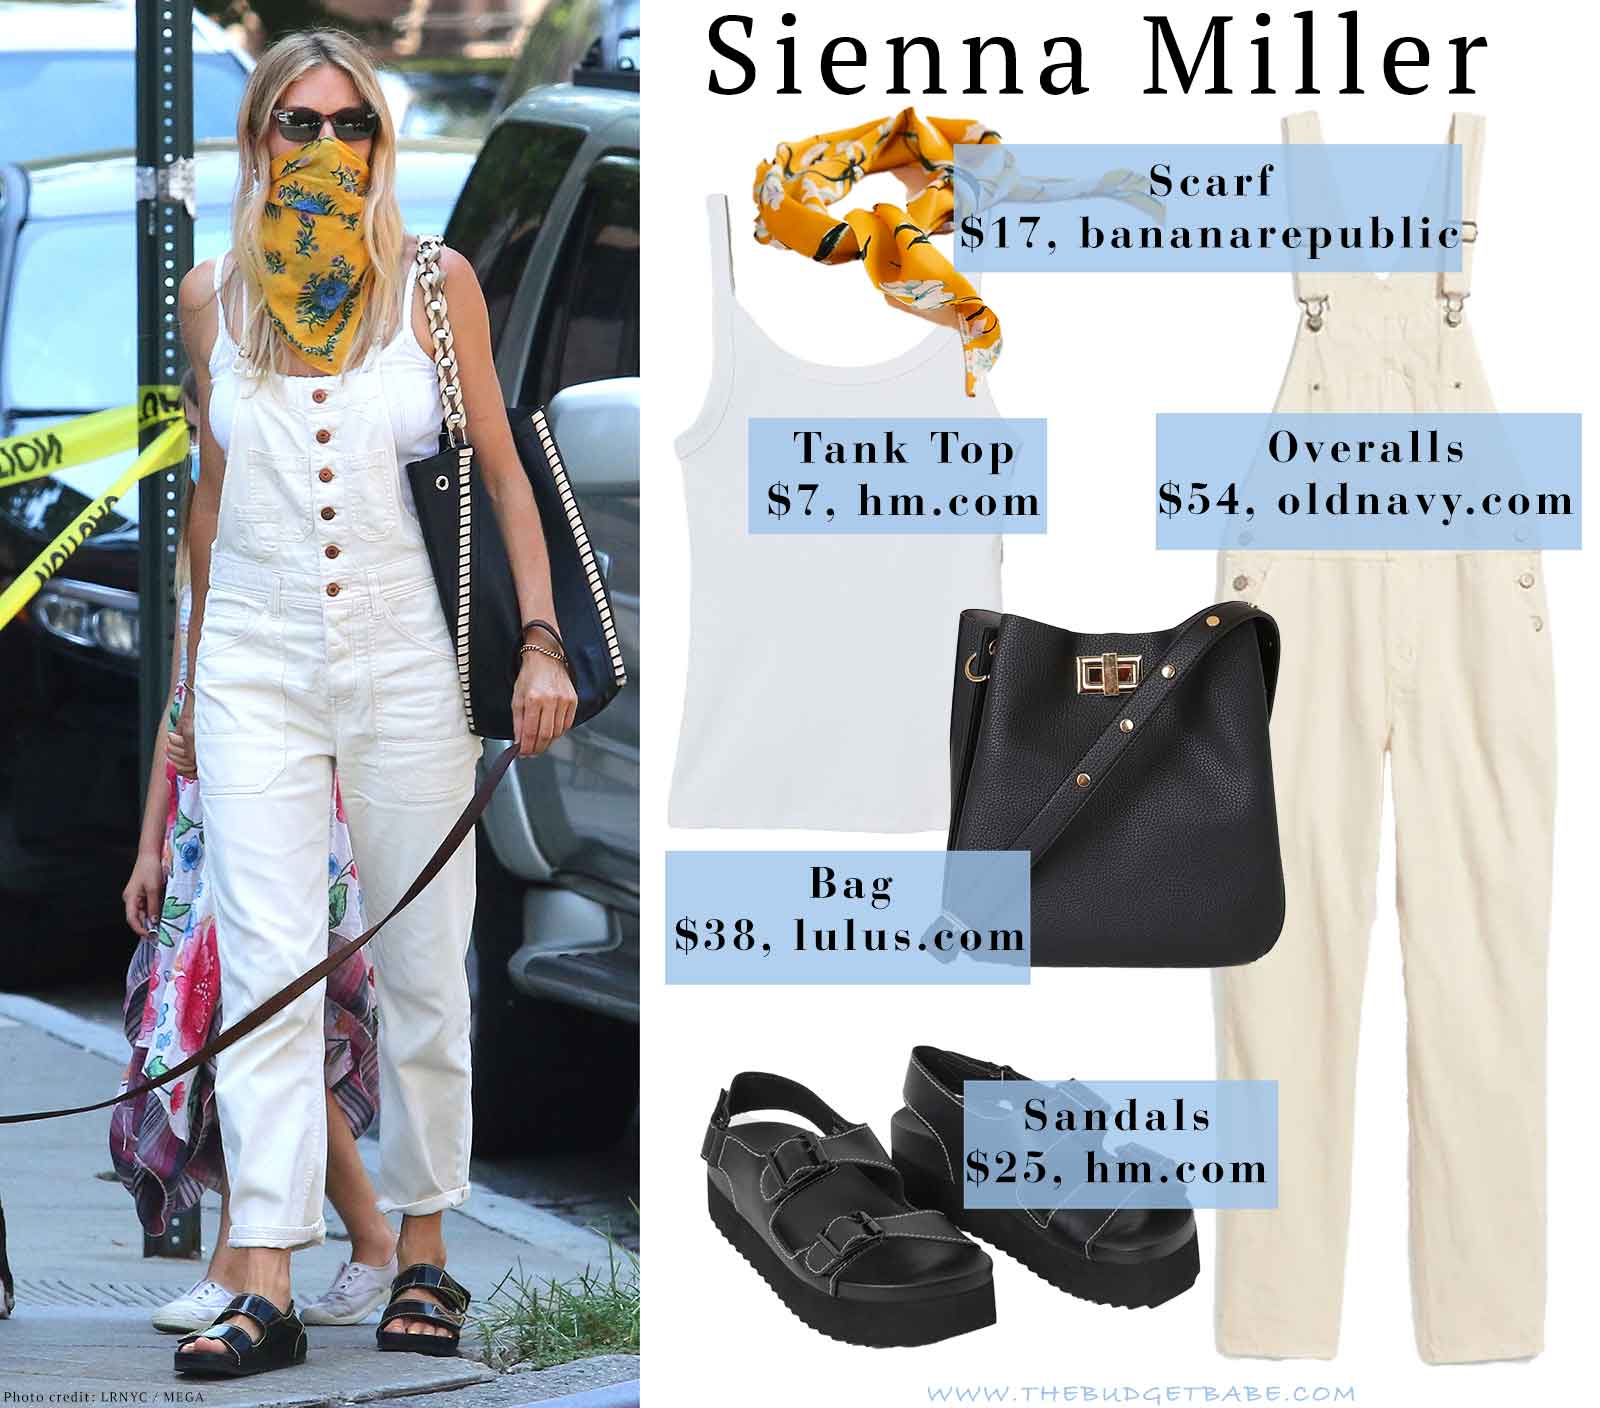 Sienna Miller's overalls and black sandals look for less | The Budget Babe fashion blog